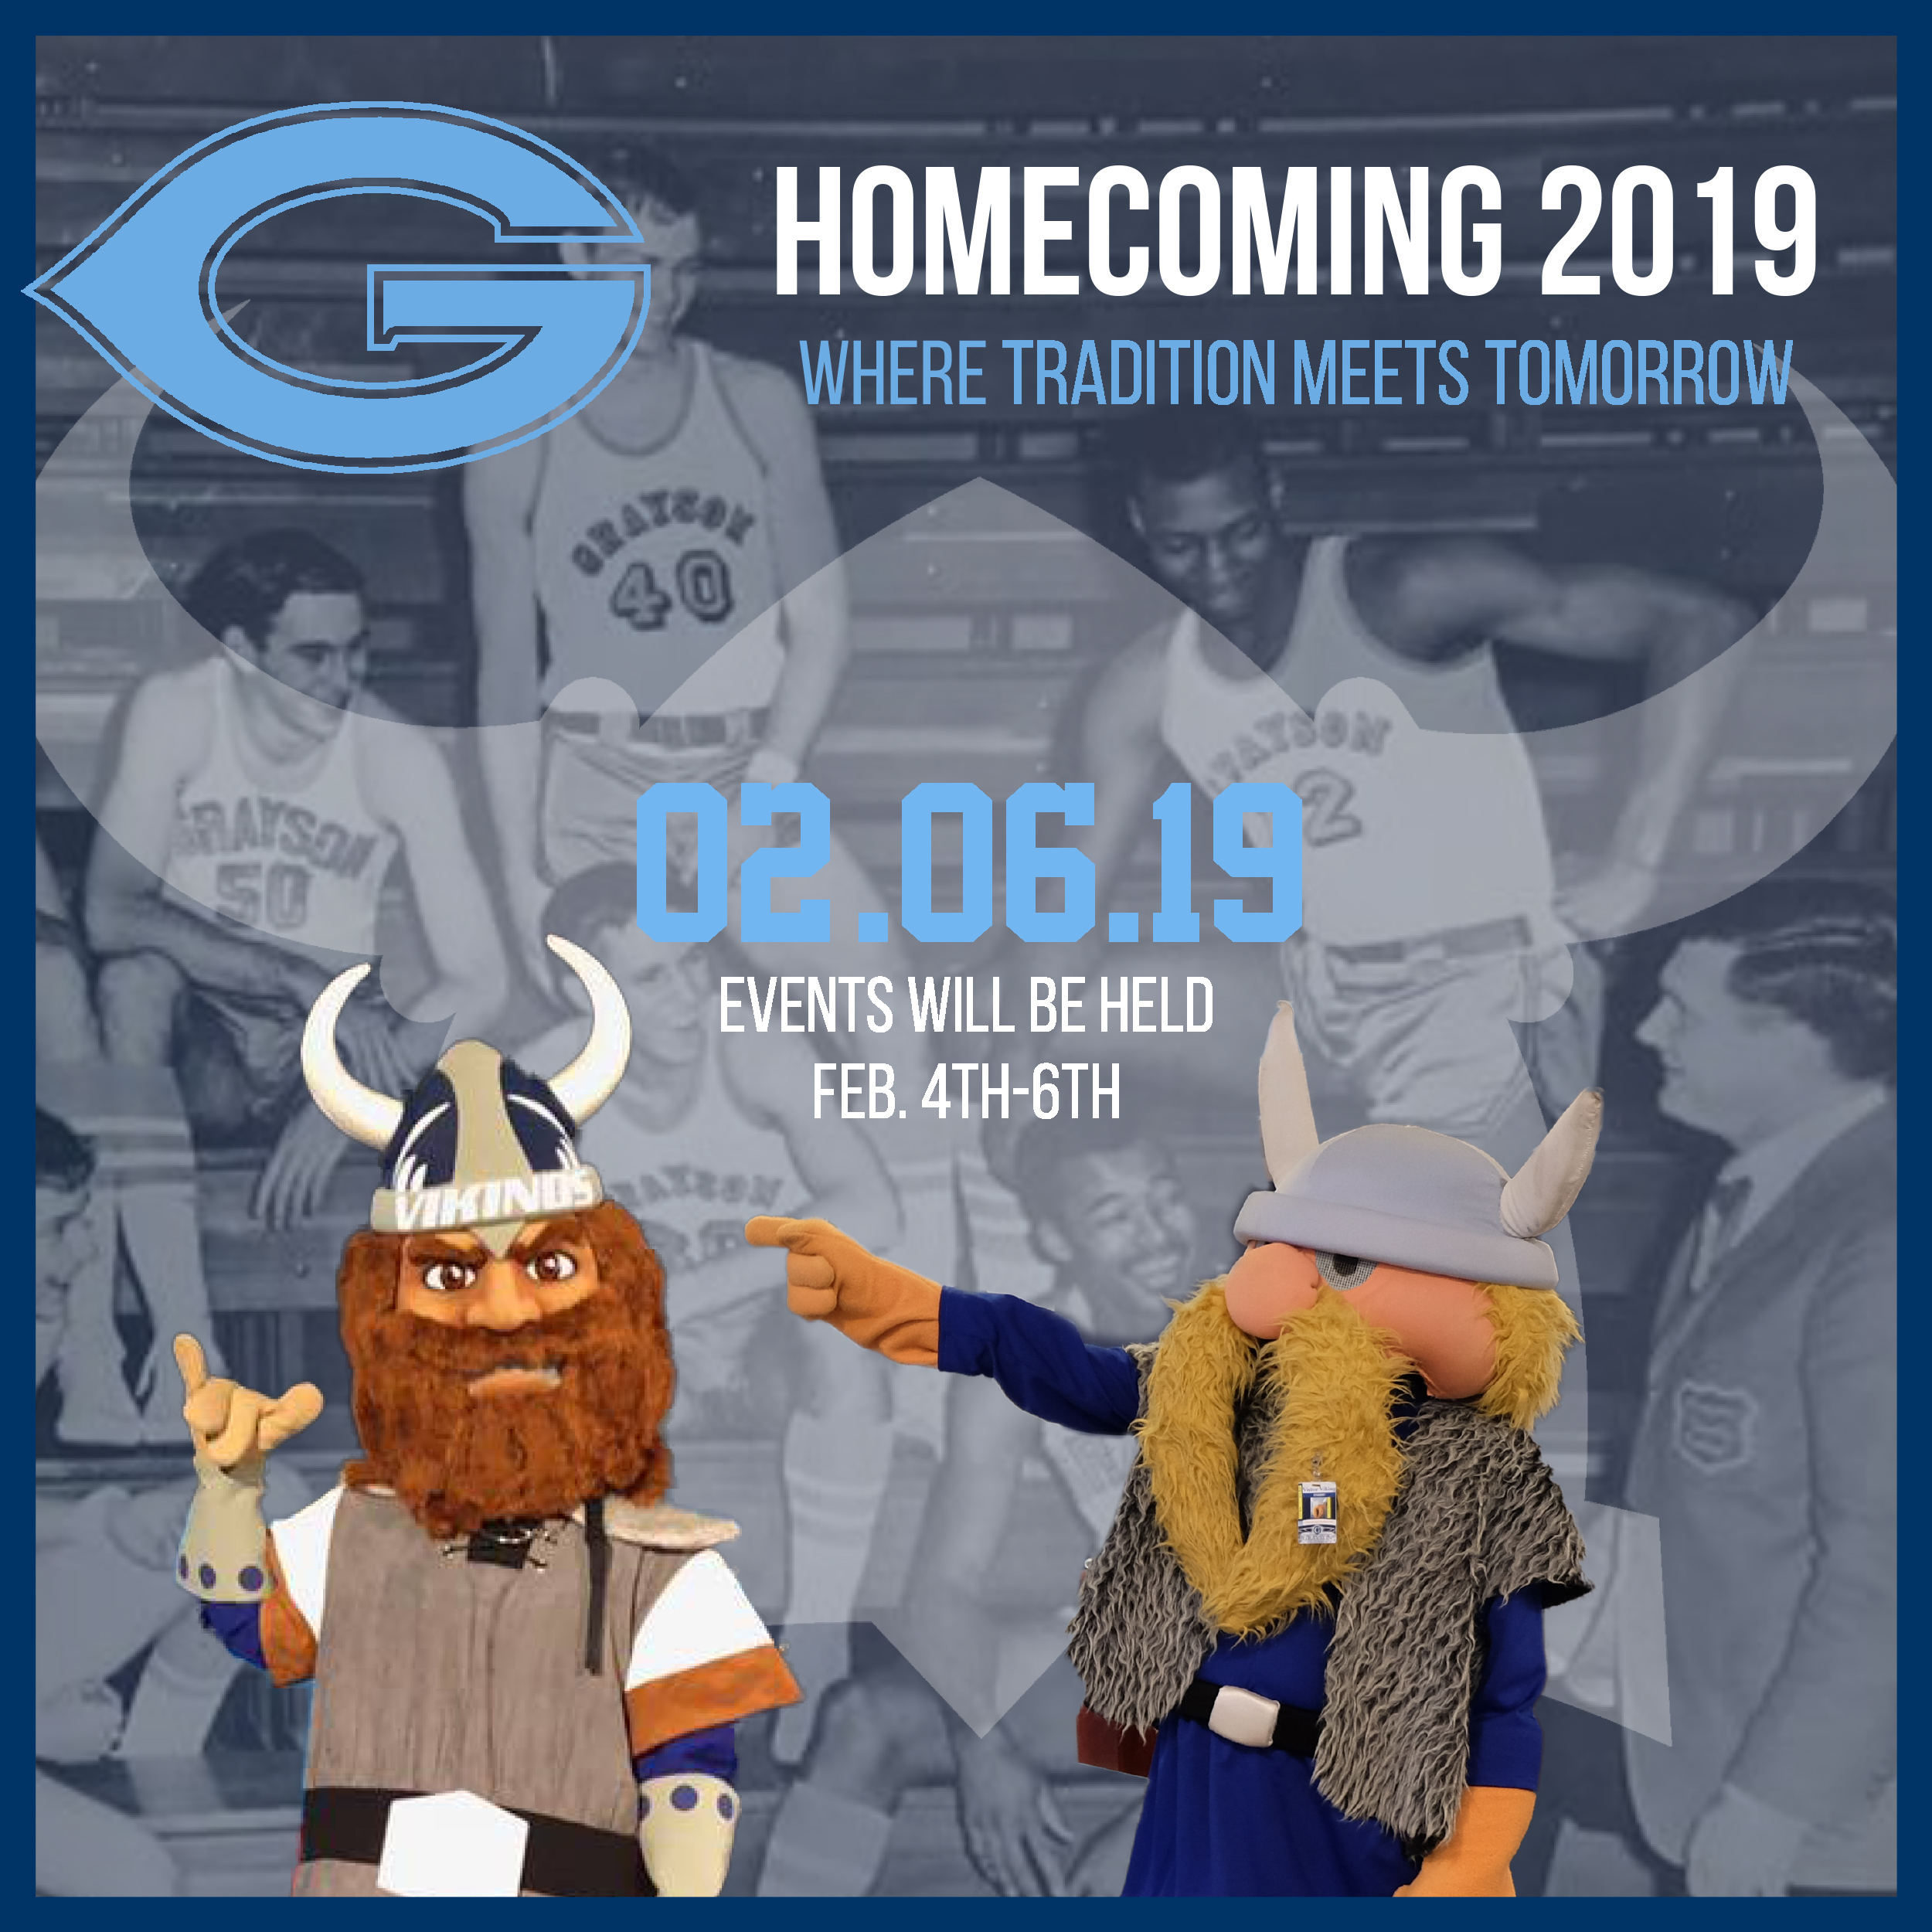 Homecoming 2019 on February 6, 2019. Events will be held February 4th through 6th